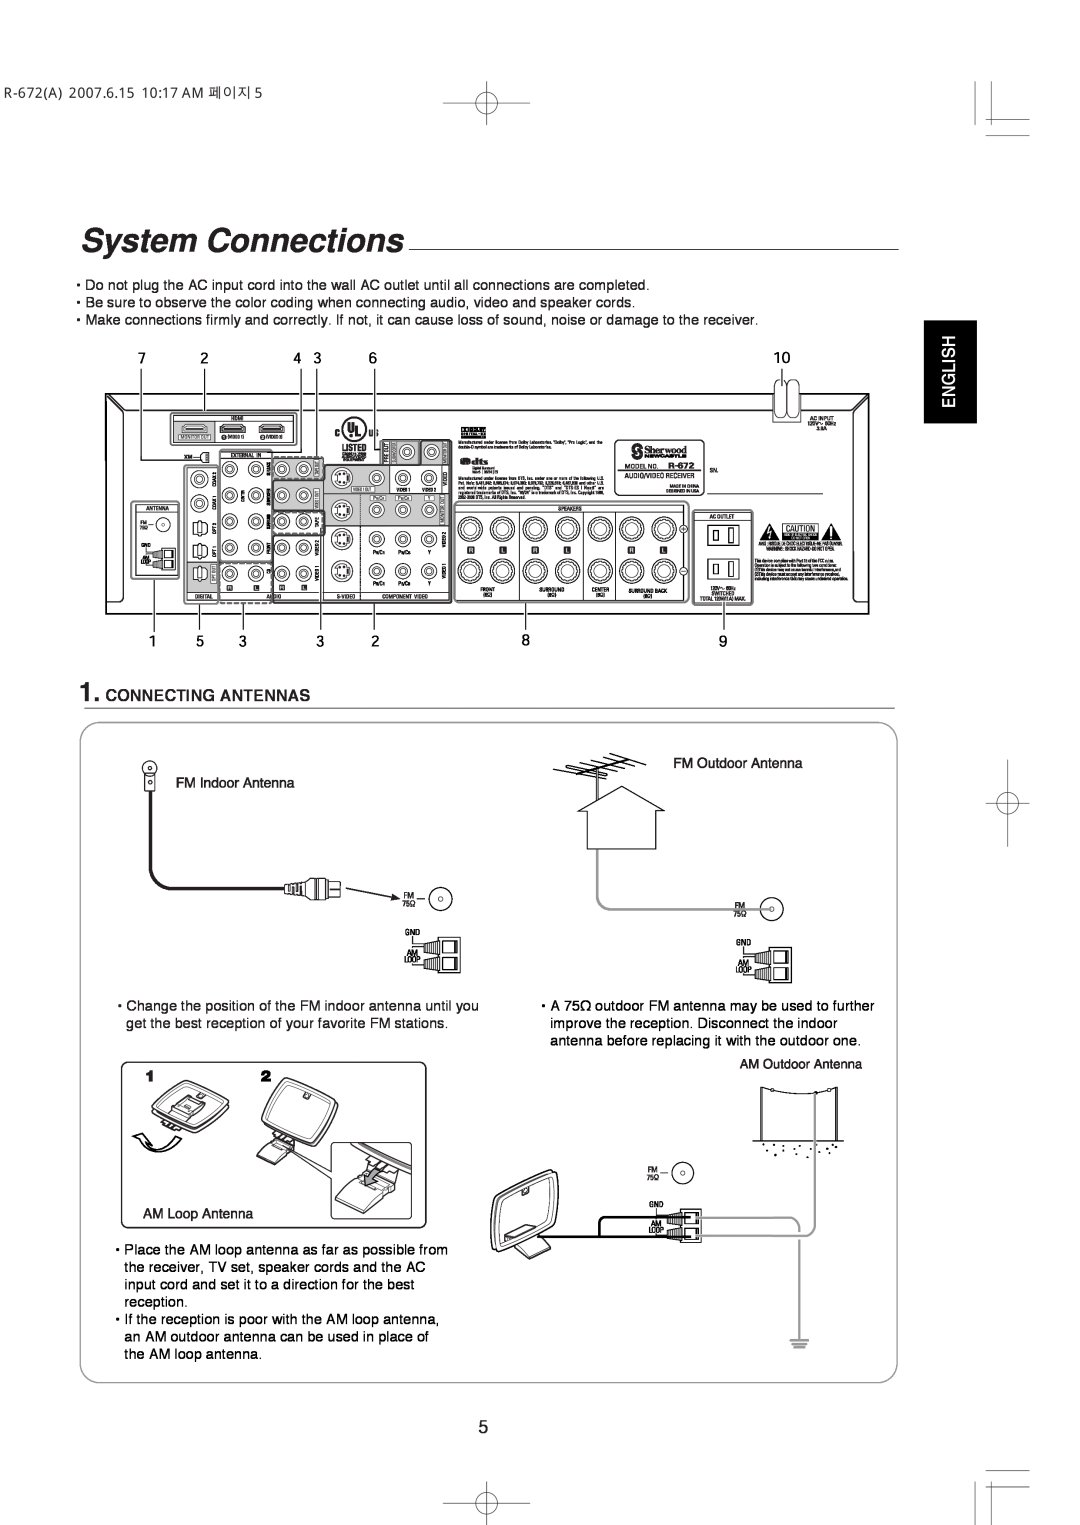 XM Satellite Radio manual System Connections, Connecting Antennas, English, R-672A2007.6.15 10 17 AM 페이지 